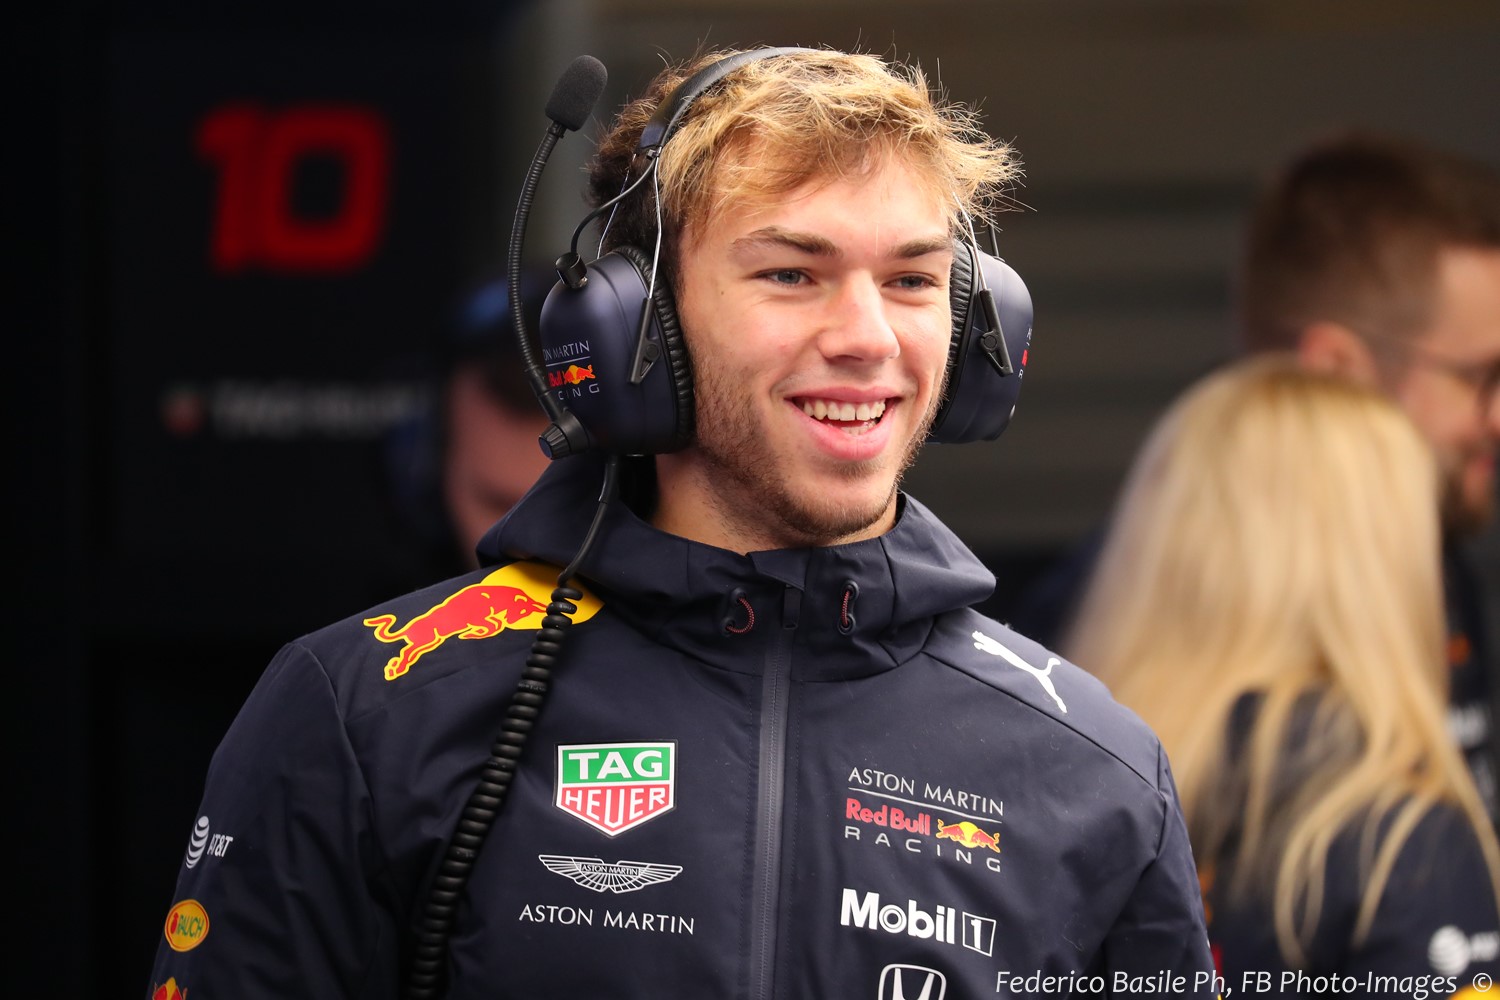 Gasly's check must have cleared